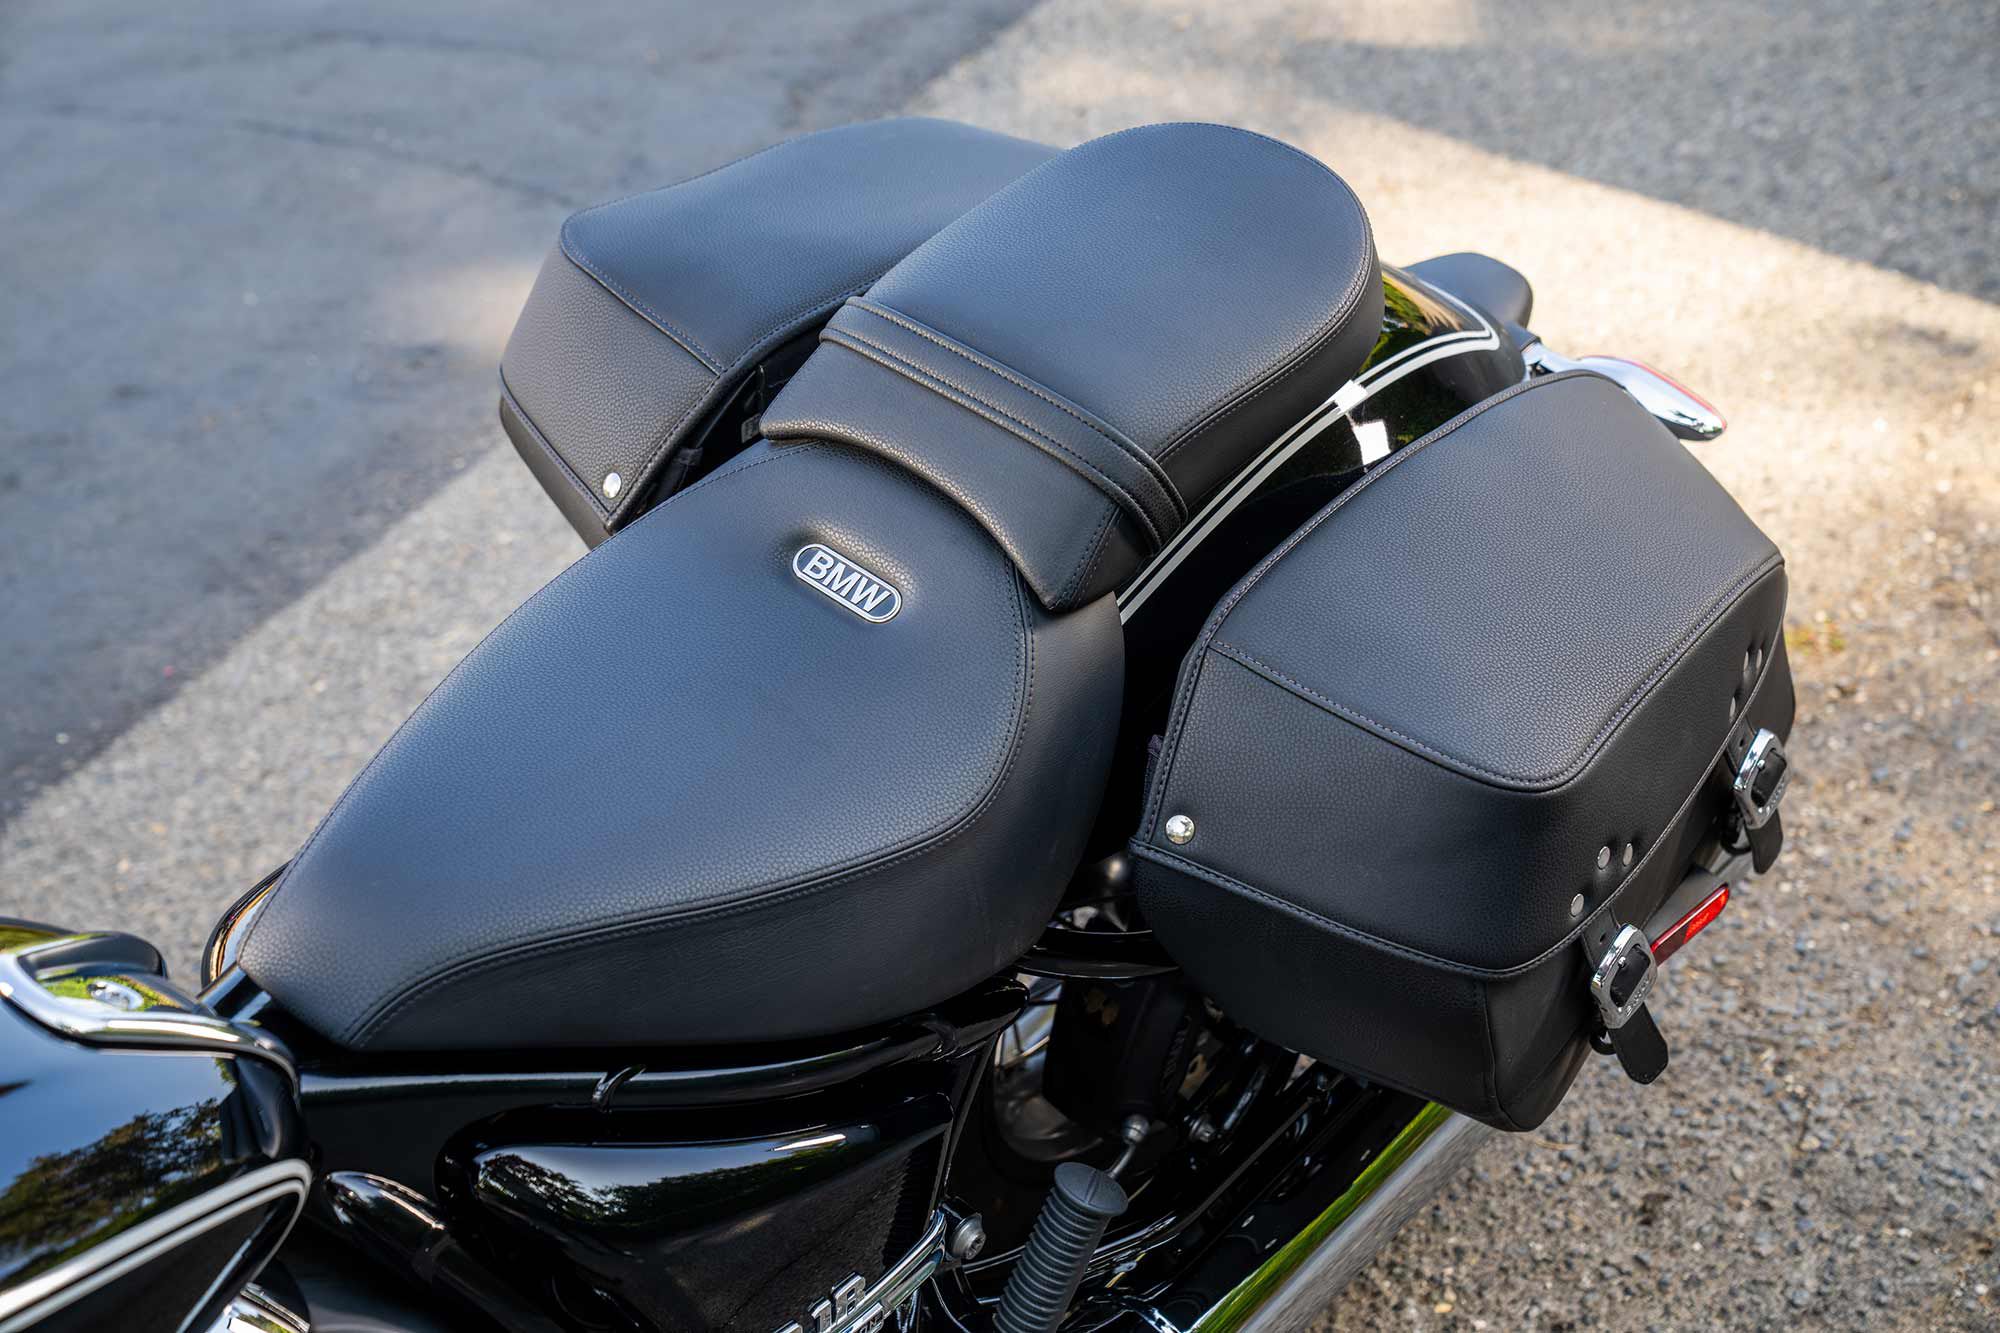 The rider’s seat has a pleasing dish which helps keep the rider in place during braking and acceleration. We also love the look and function of the saddlebags.